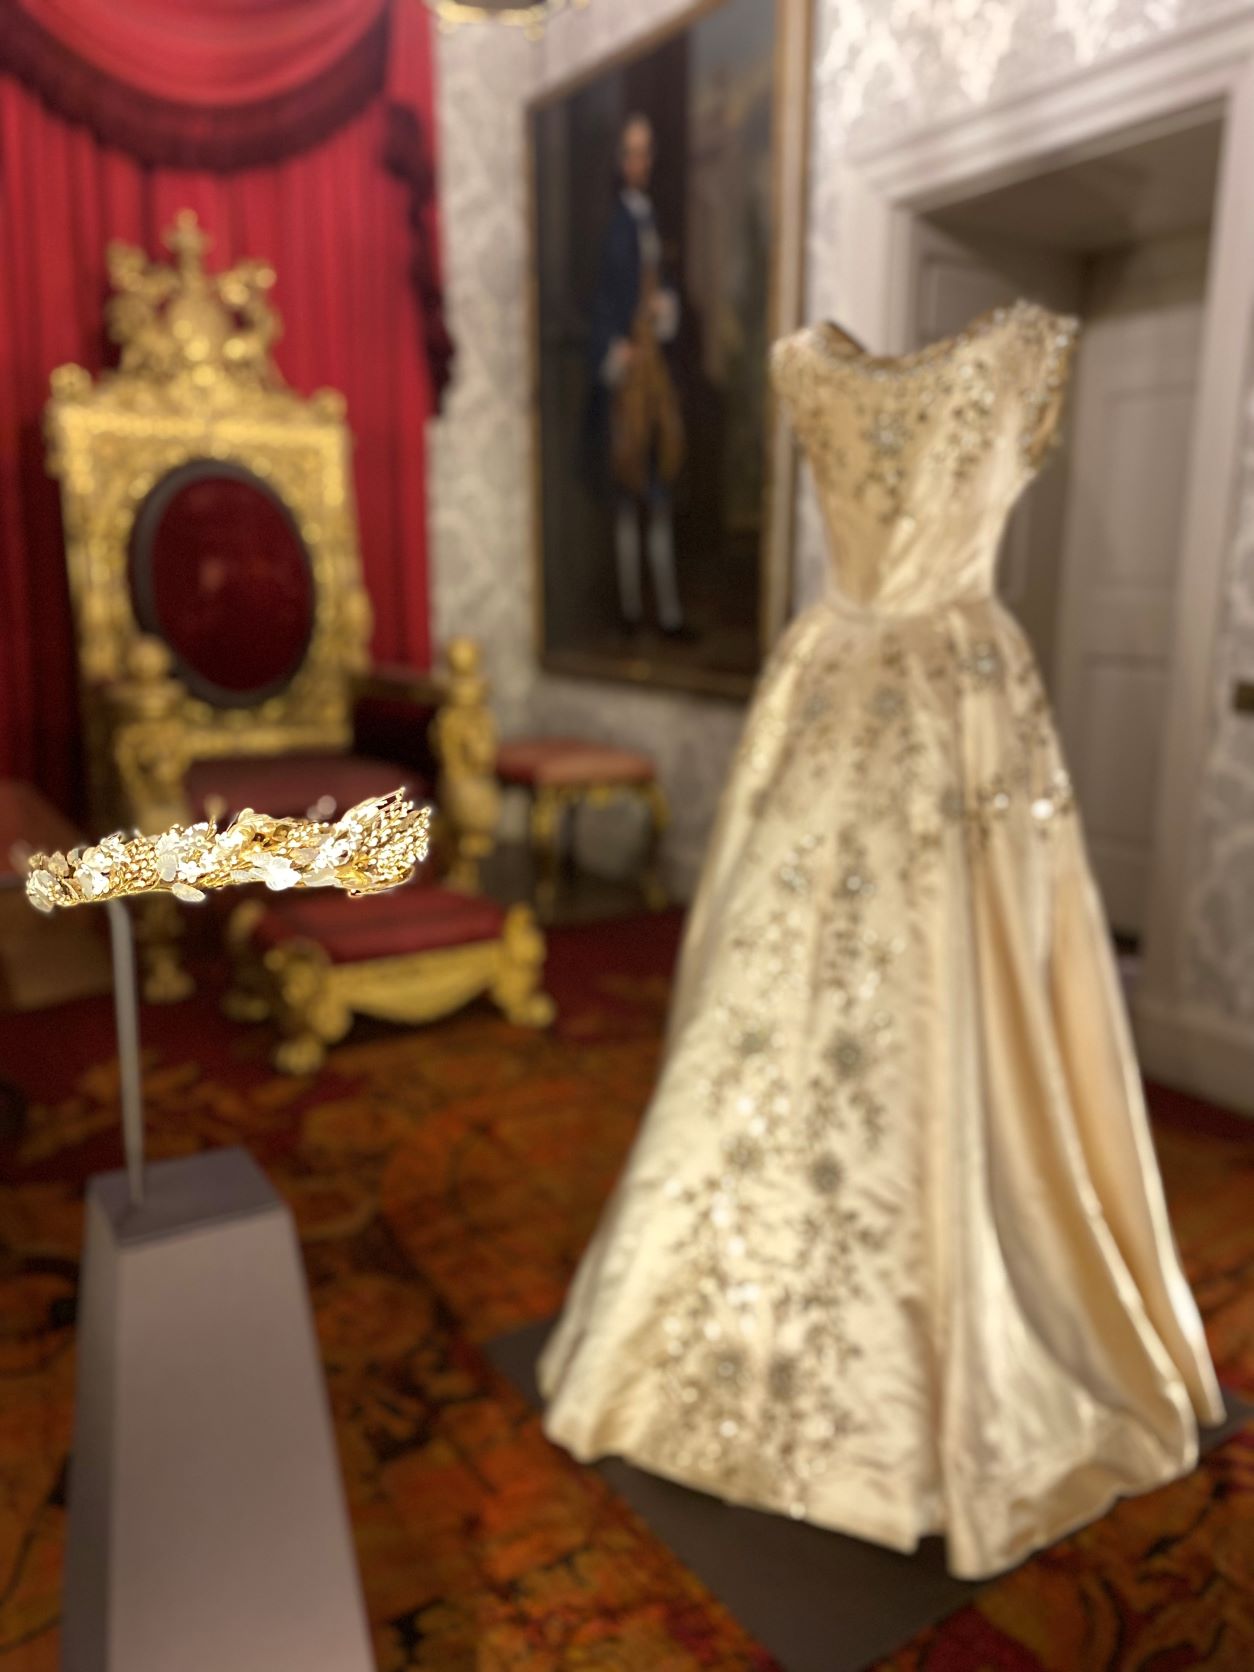 The Norman Hartnell dress and headress worn by Lady Jane Heathcote-Drummond-Willoughby as Maid of Honour at the Queen's coronation